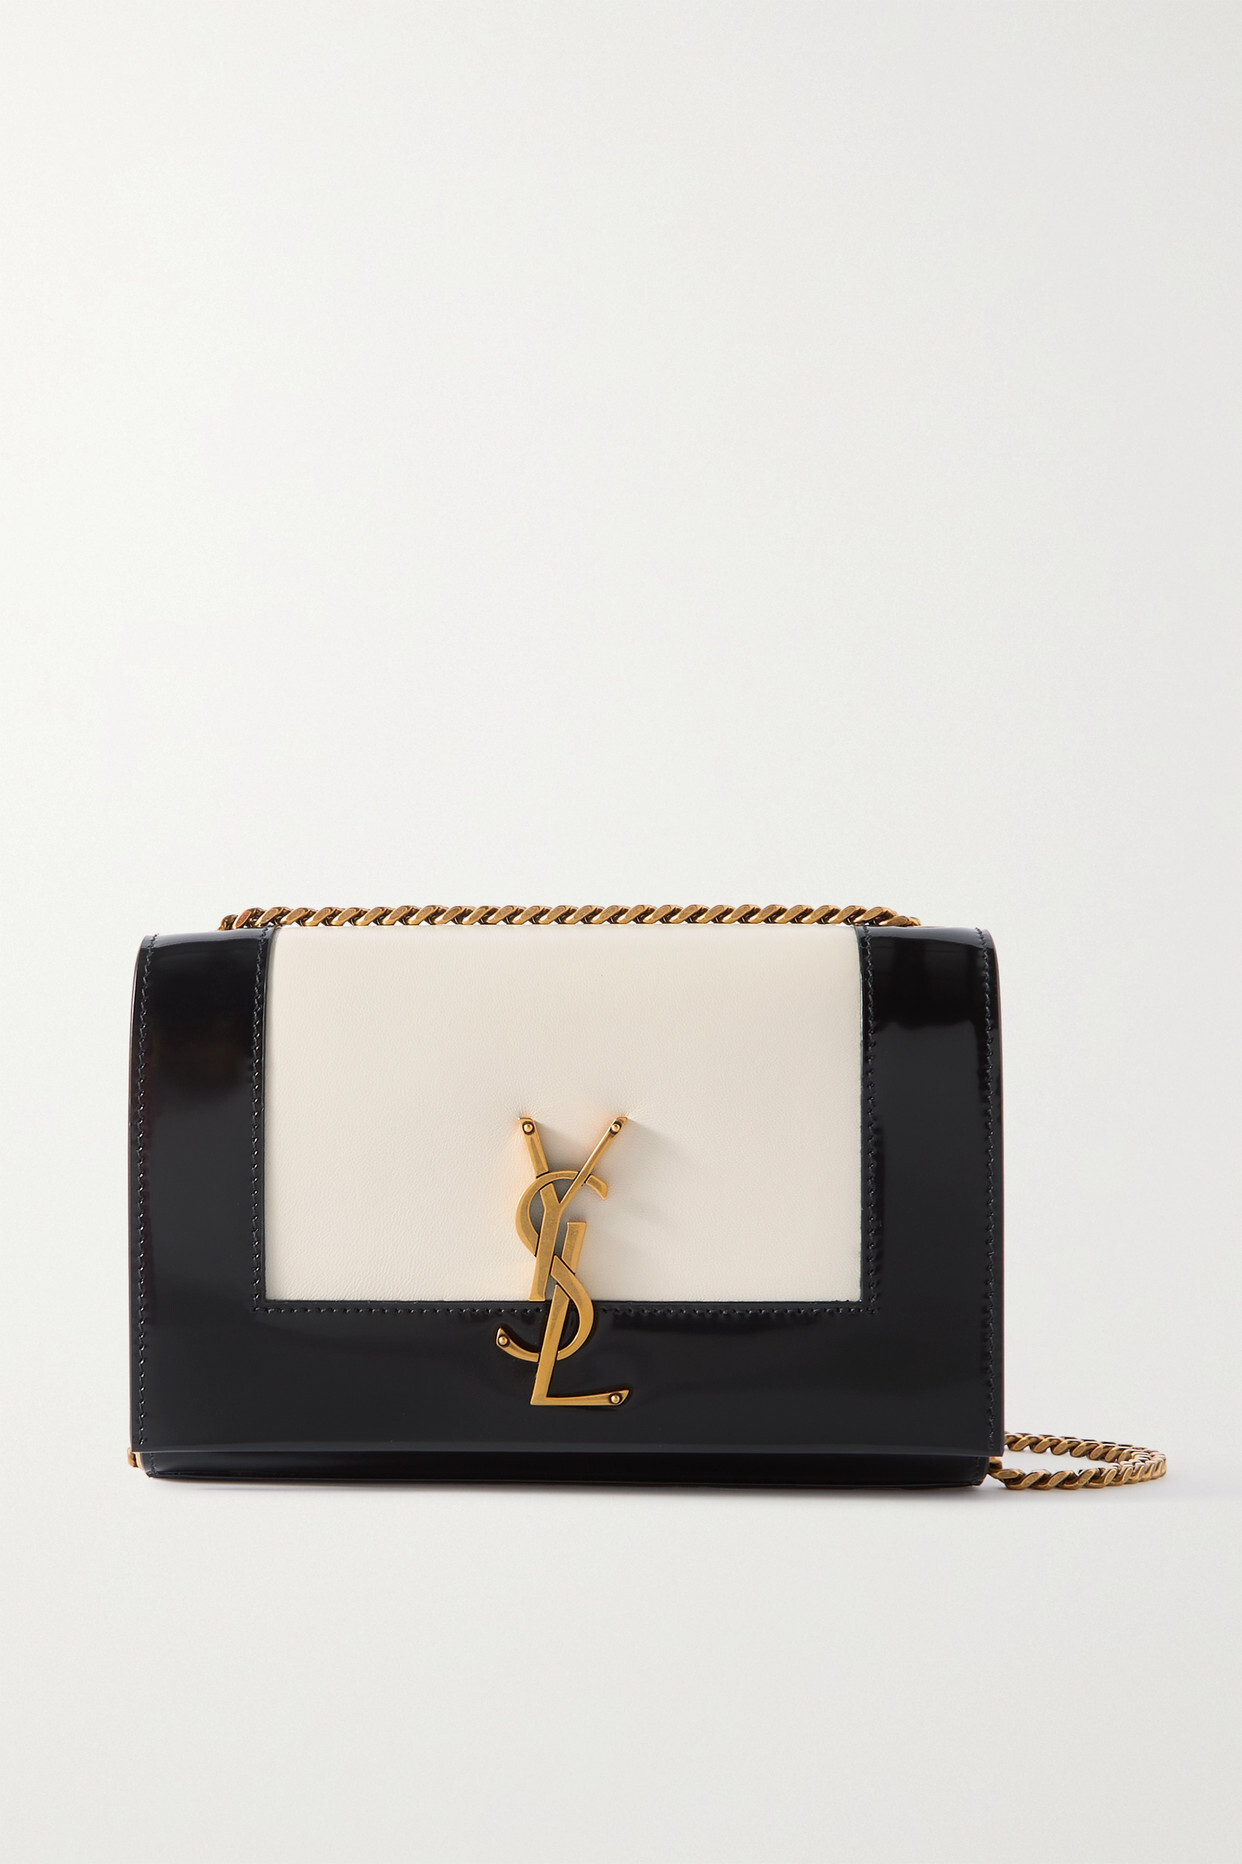 SAINT LAURENT - Kate Small Two-tone Leather Shoulder Bag - White